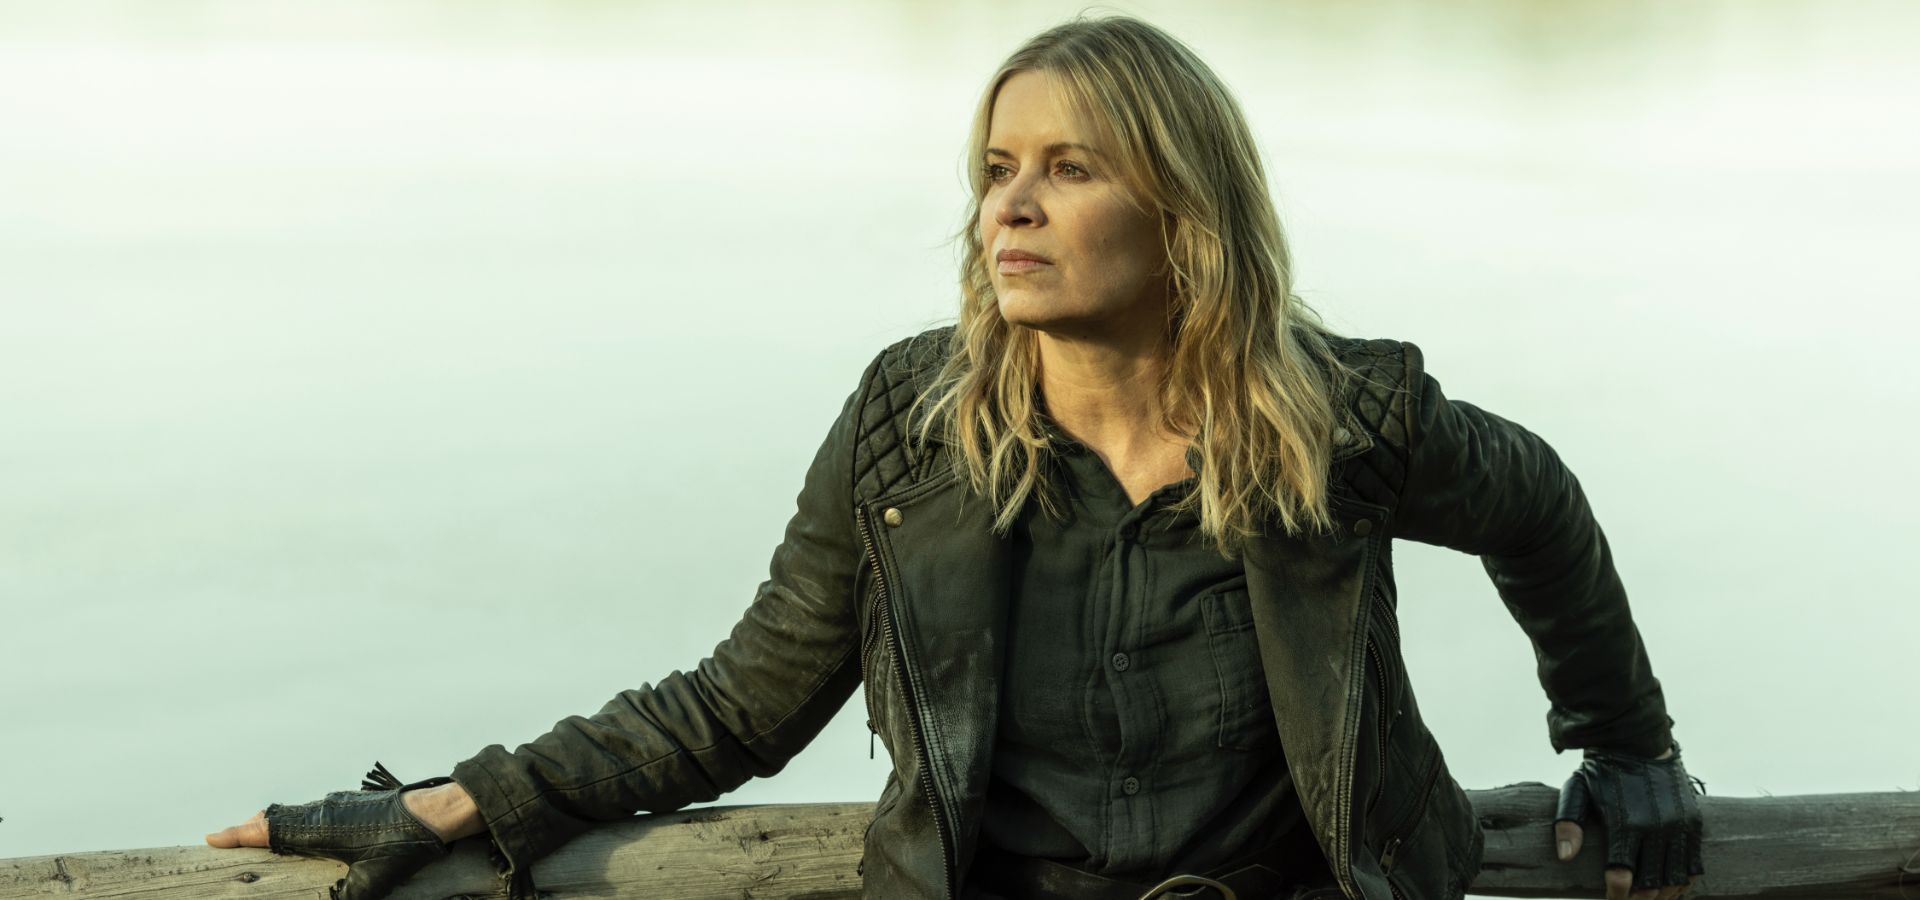 Fear the Walking Dead Q&A — Kim Dickens Returns to FEAR and Is Ready To Tell More Madison Stories